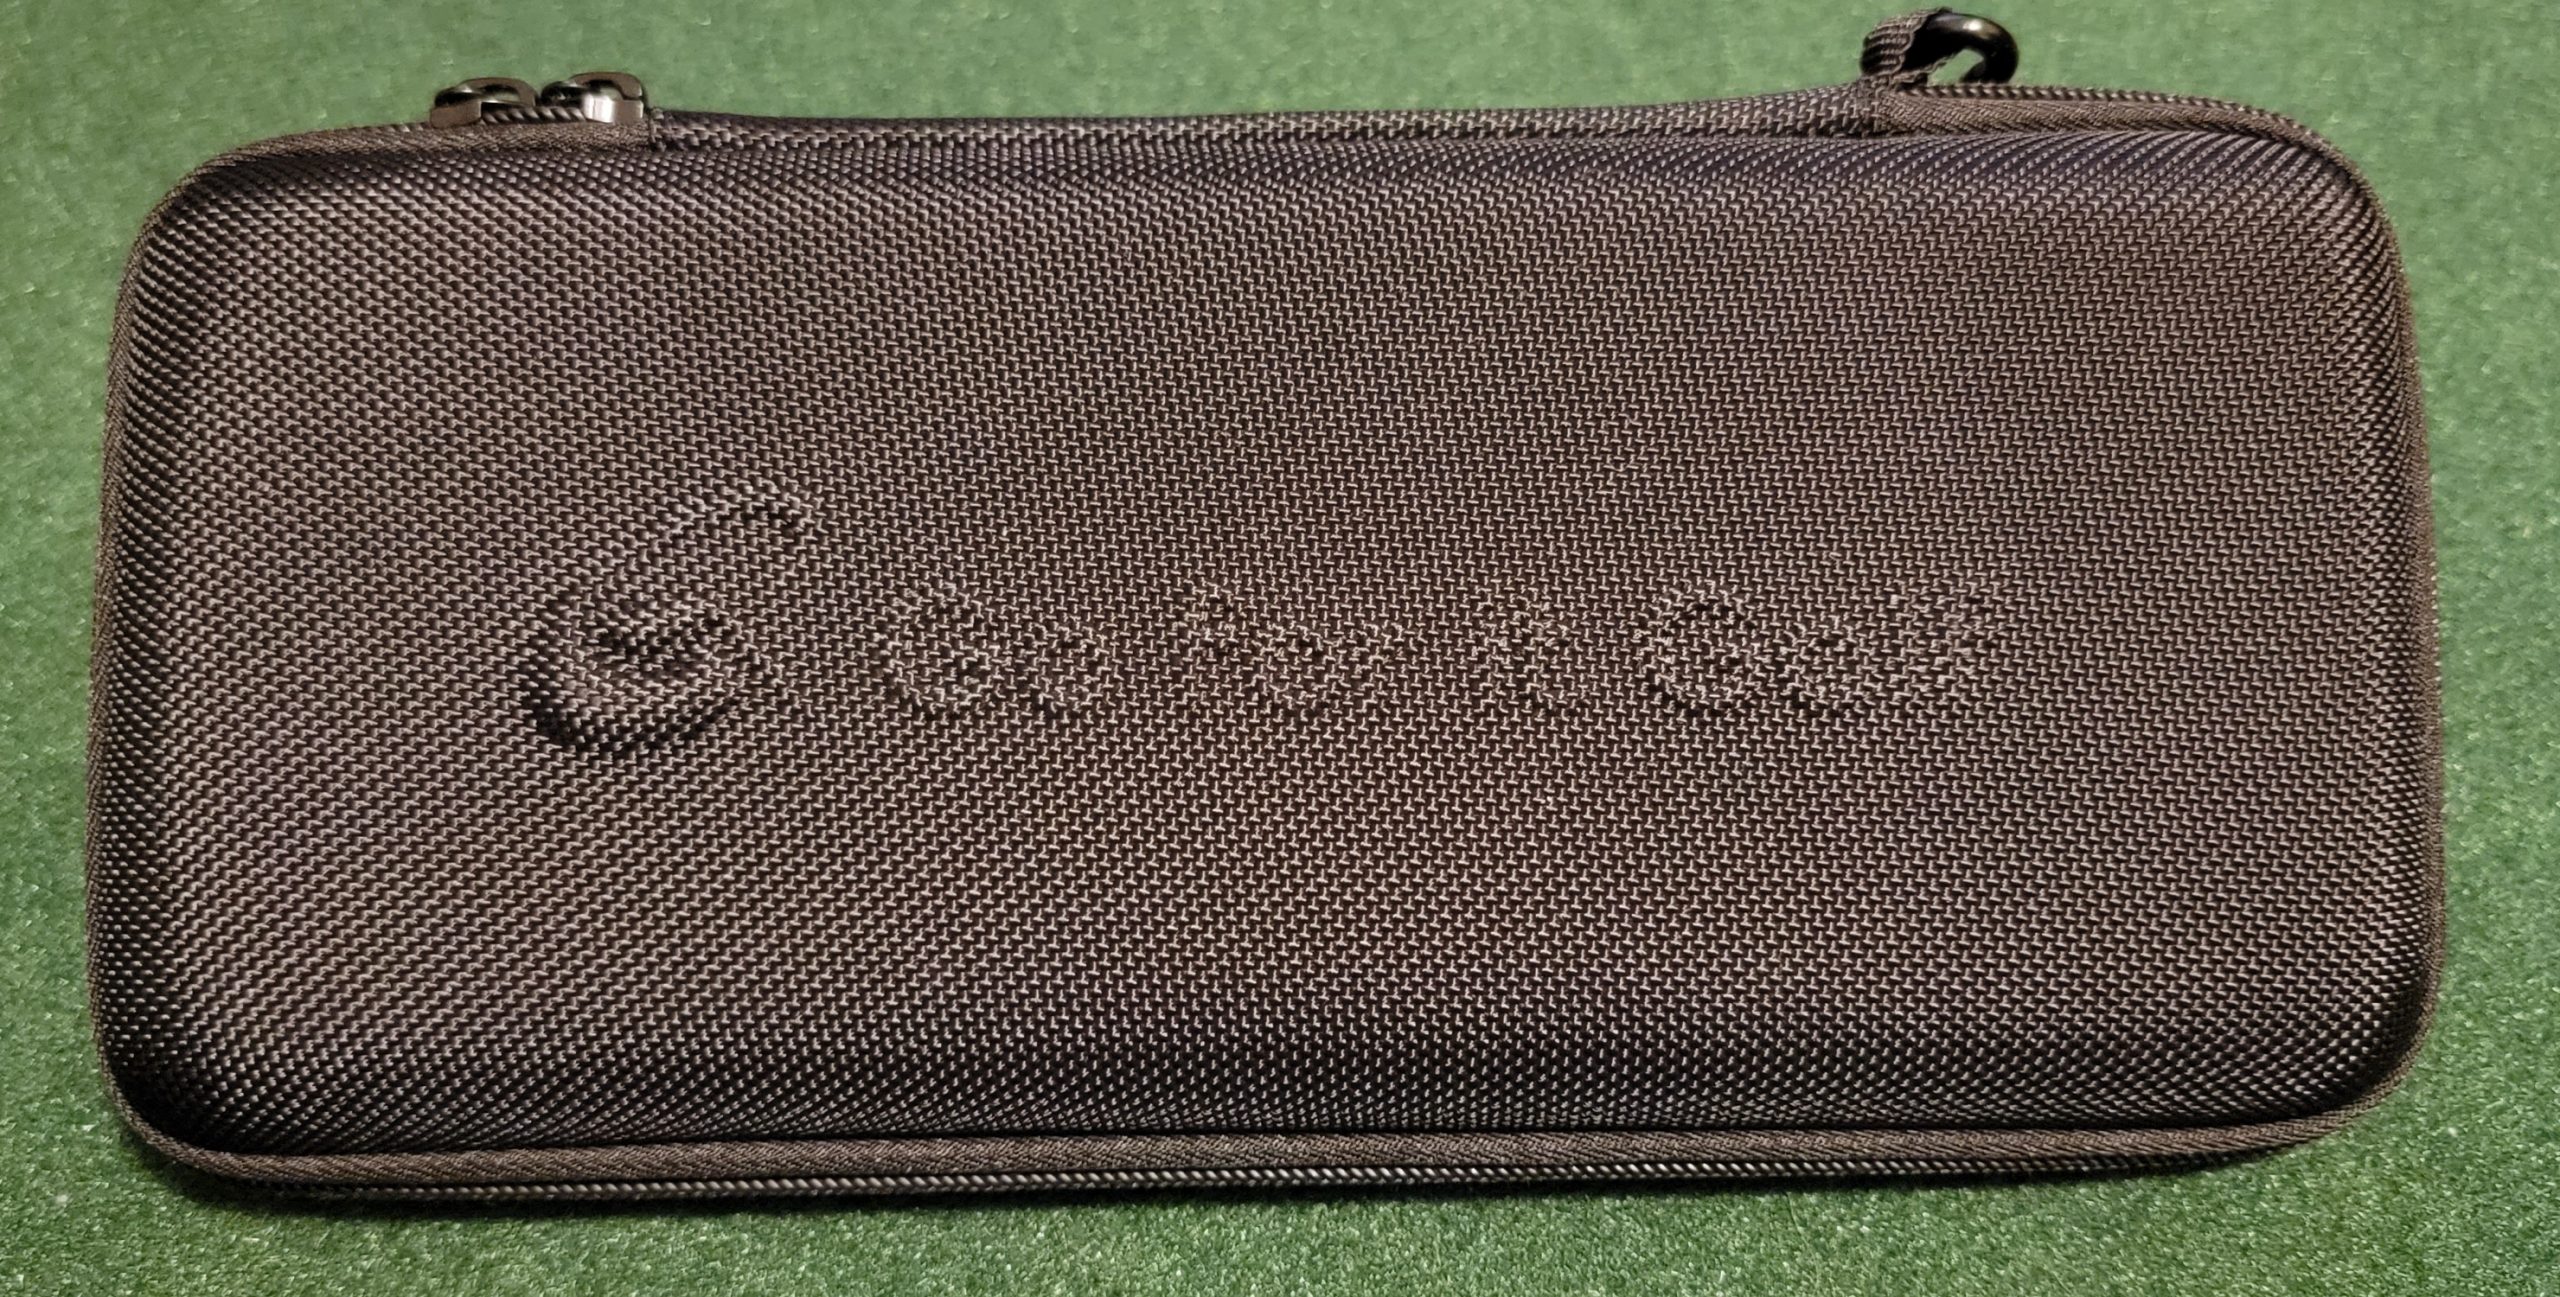 Old Duffer Golf image of the front of a golf accessory case